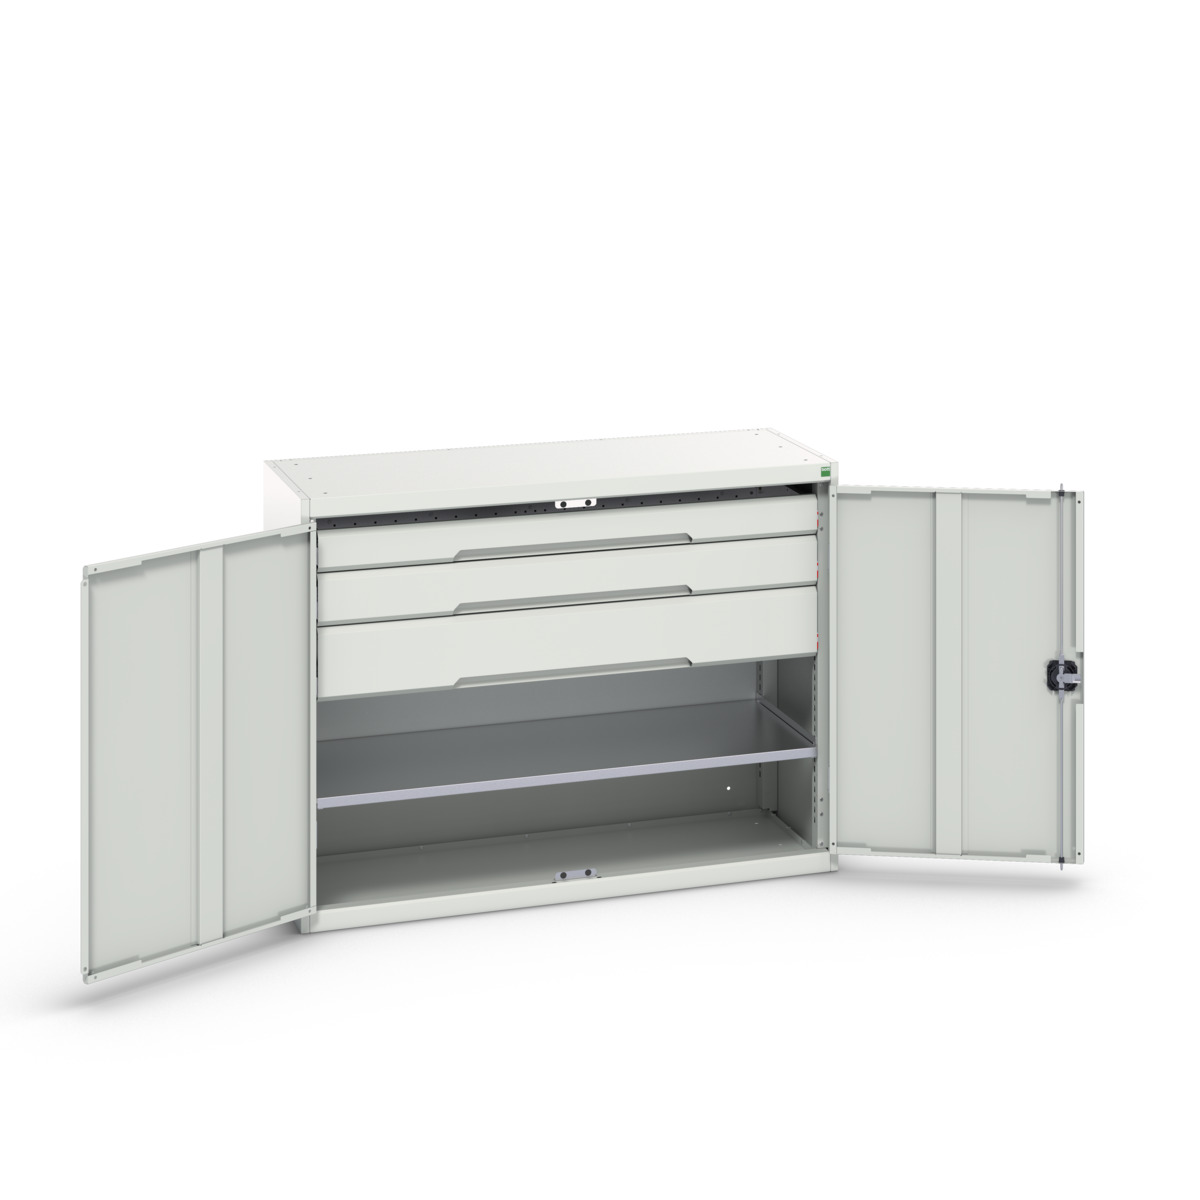 16926607.16 - verso kitted cupboard